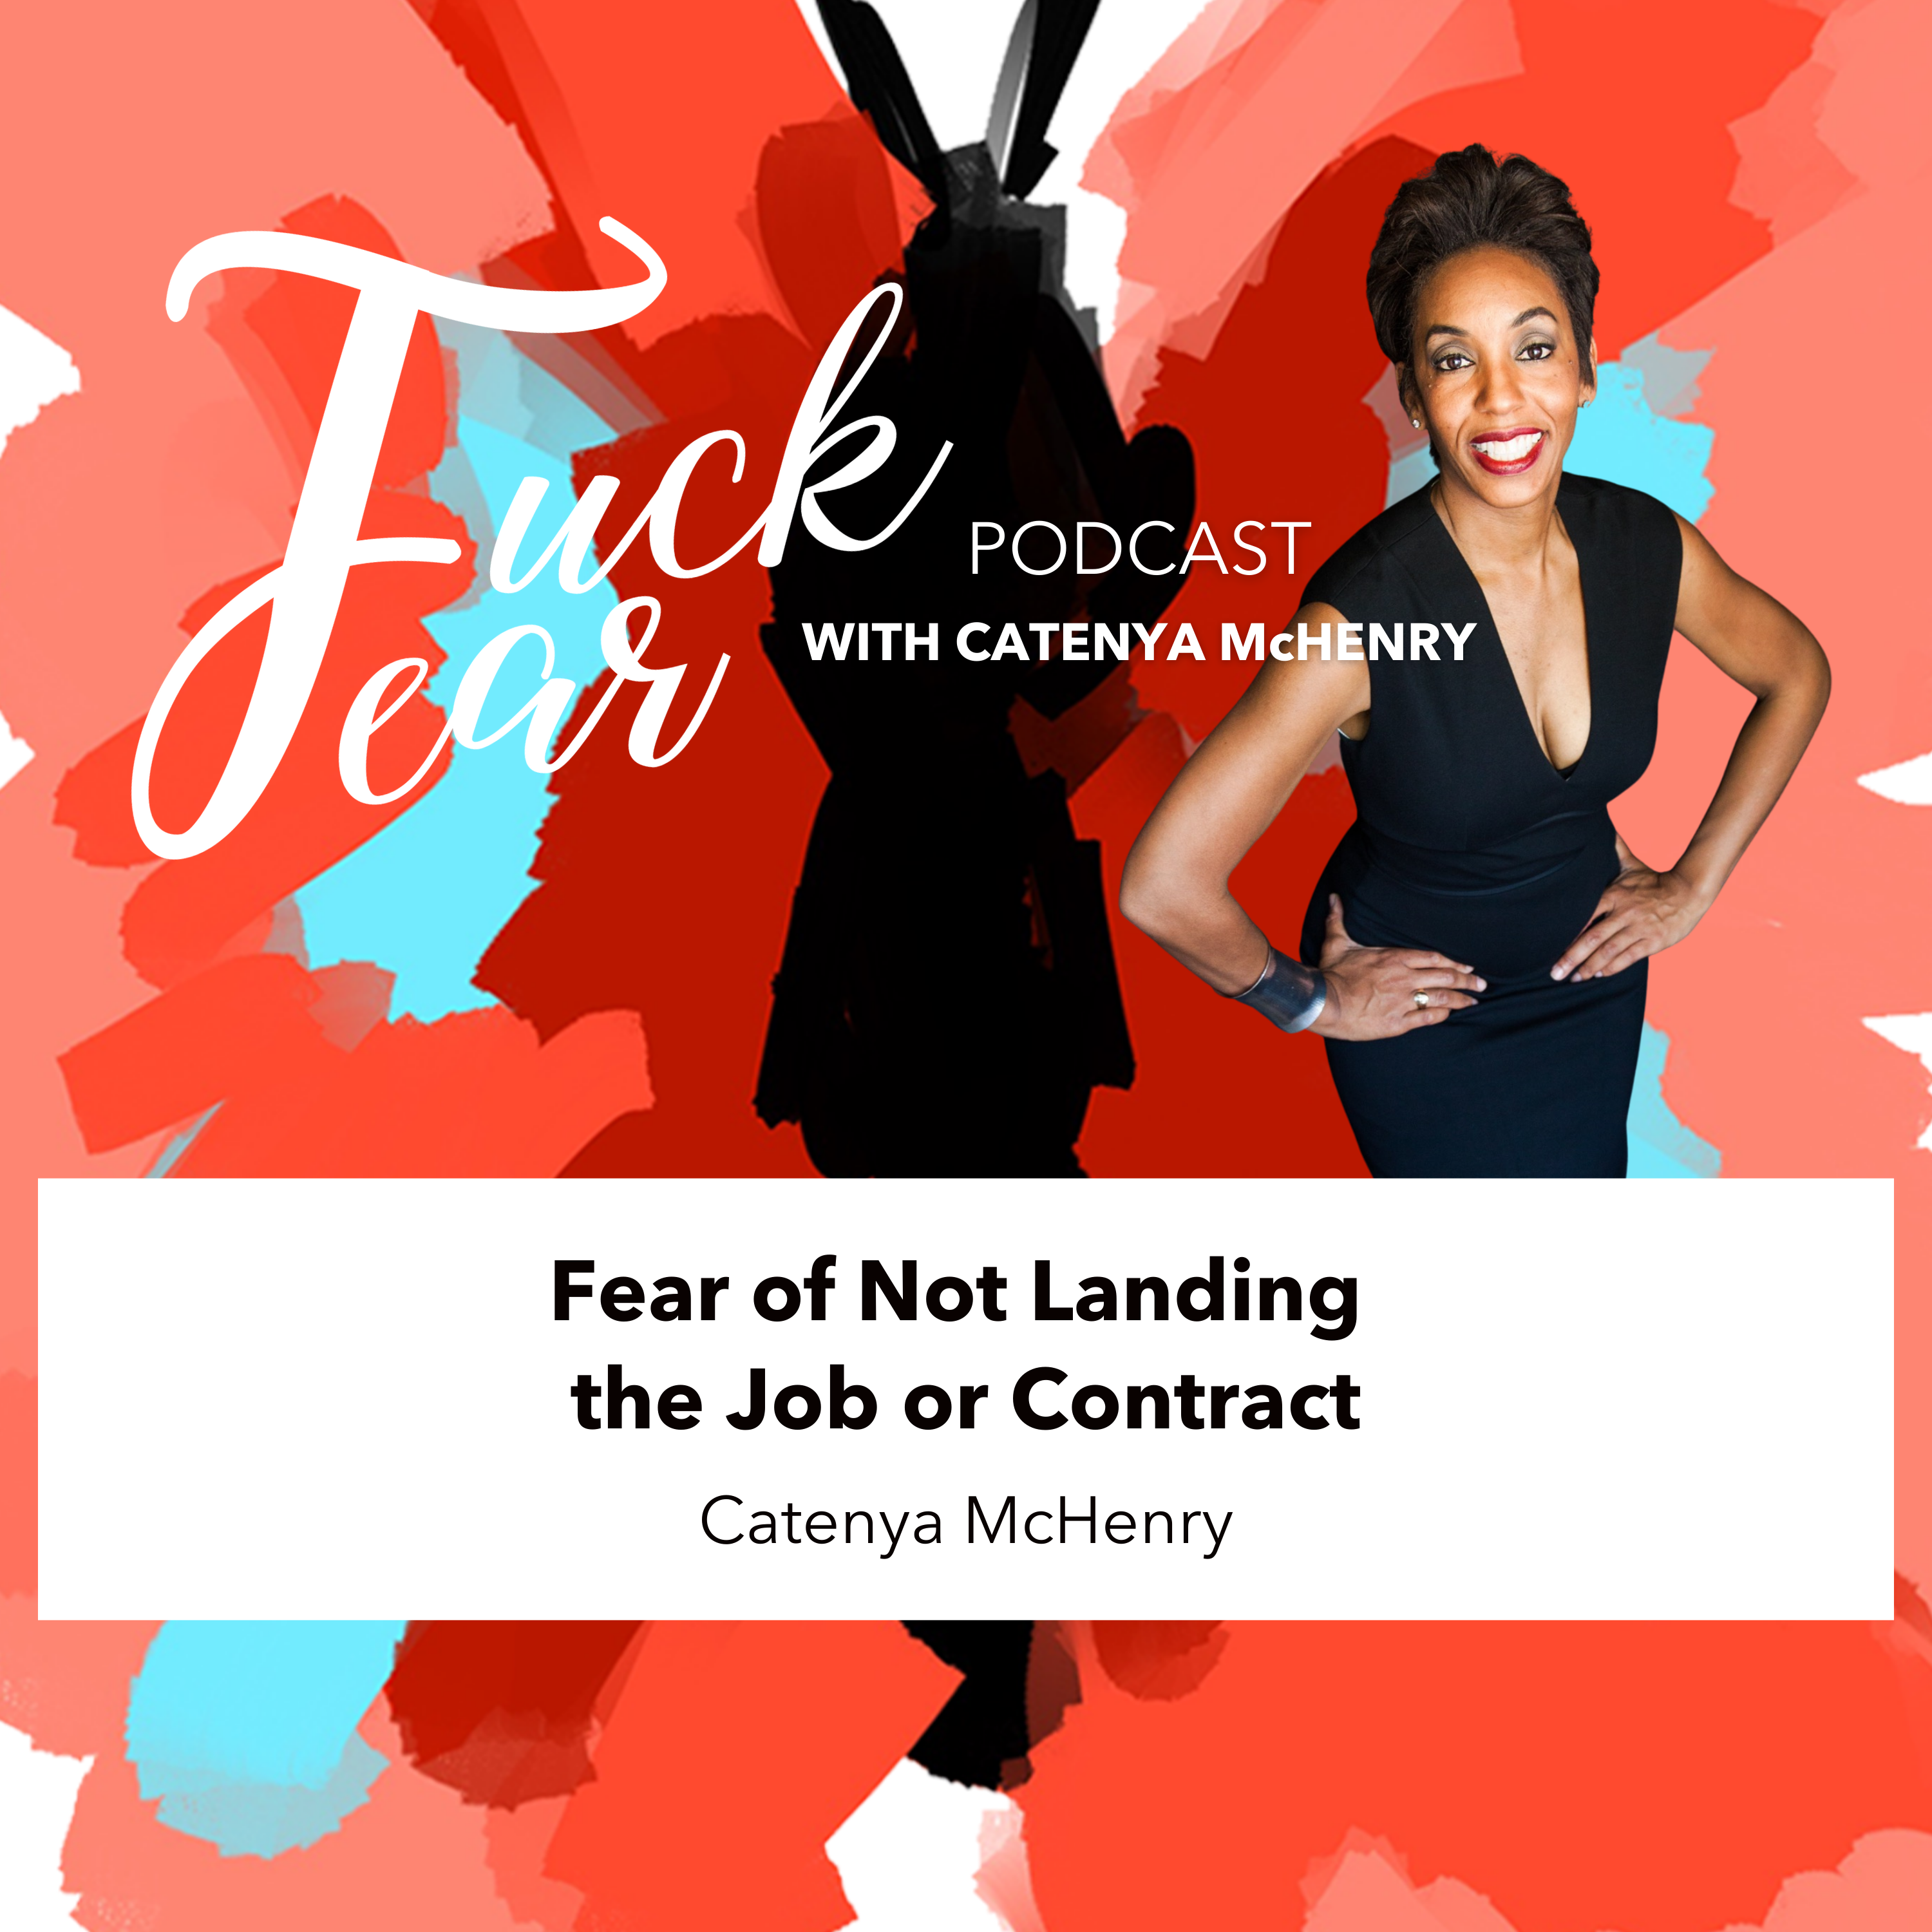 Fear of Not Landing the job or contract fuck fear podcast episode with Catenya McHenry